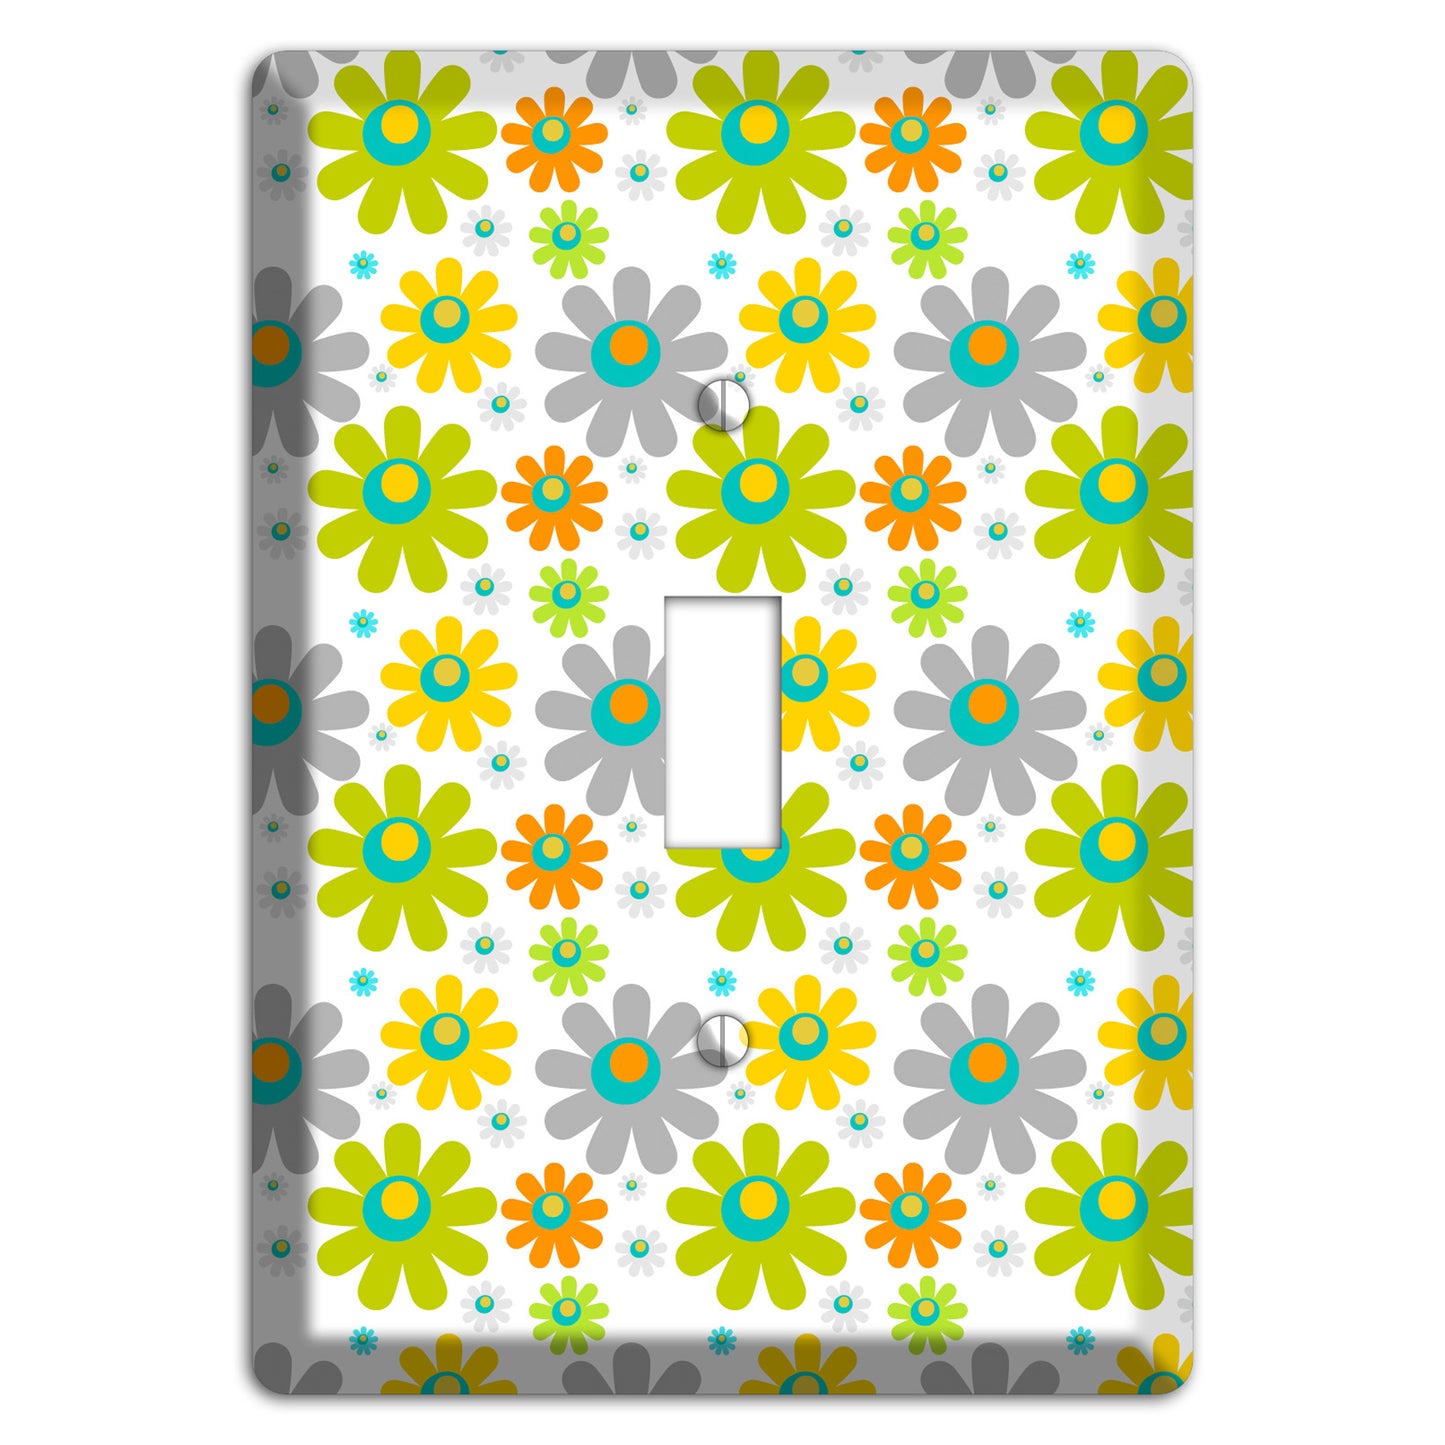 White and Yellow Flower Power Cover Plates